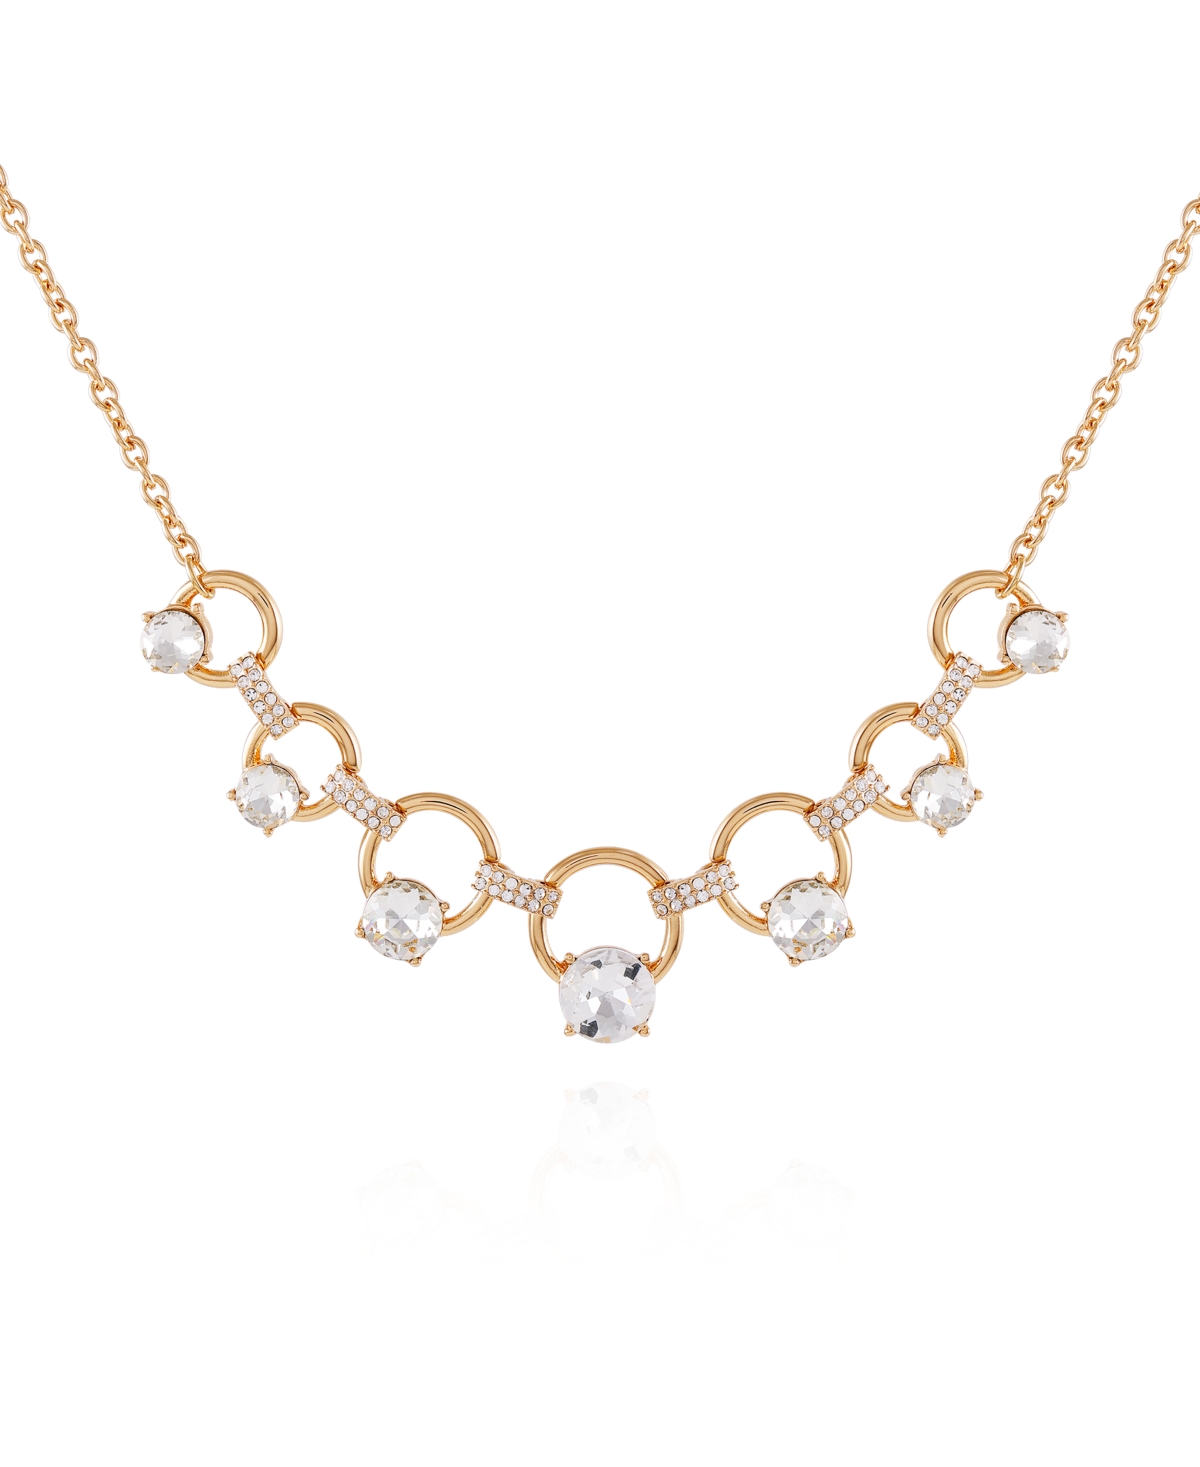 Gold-Tone Pendant Statement Necklace - Gold